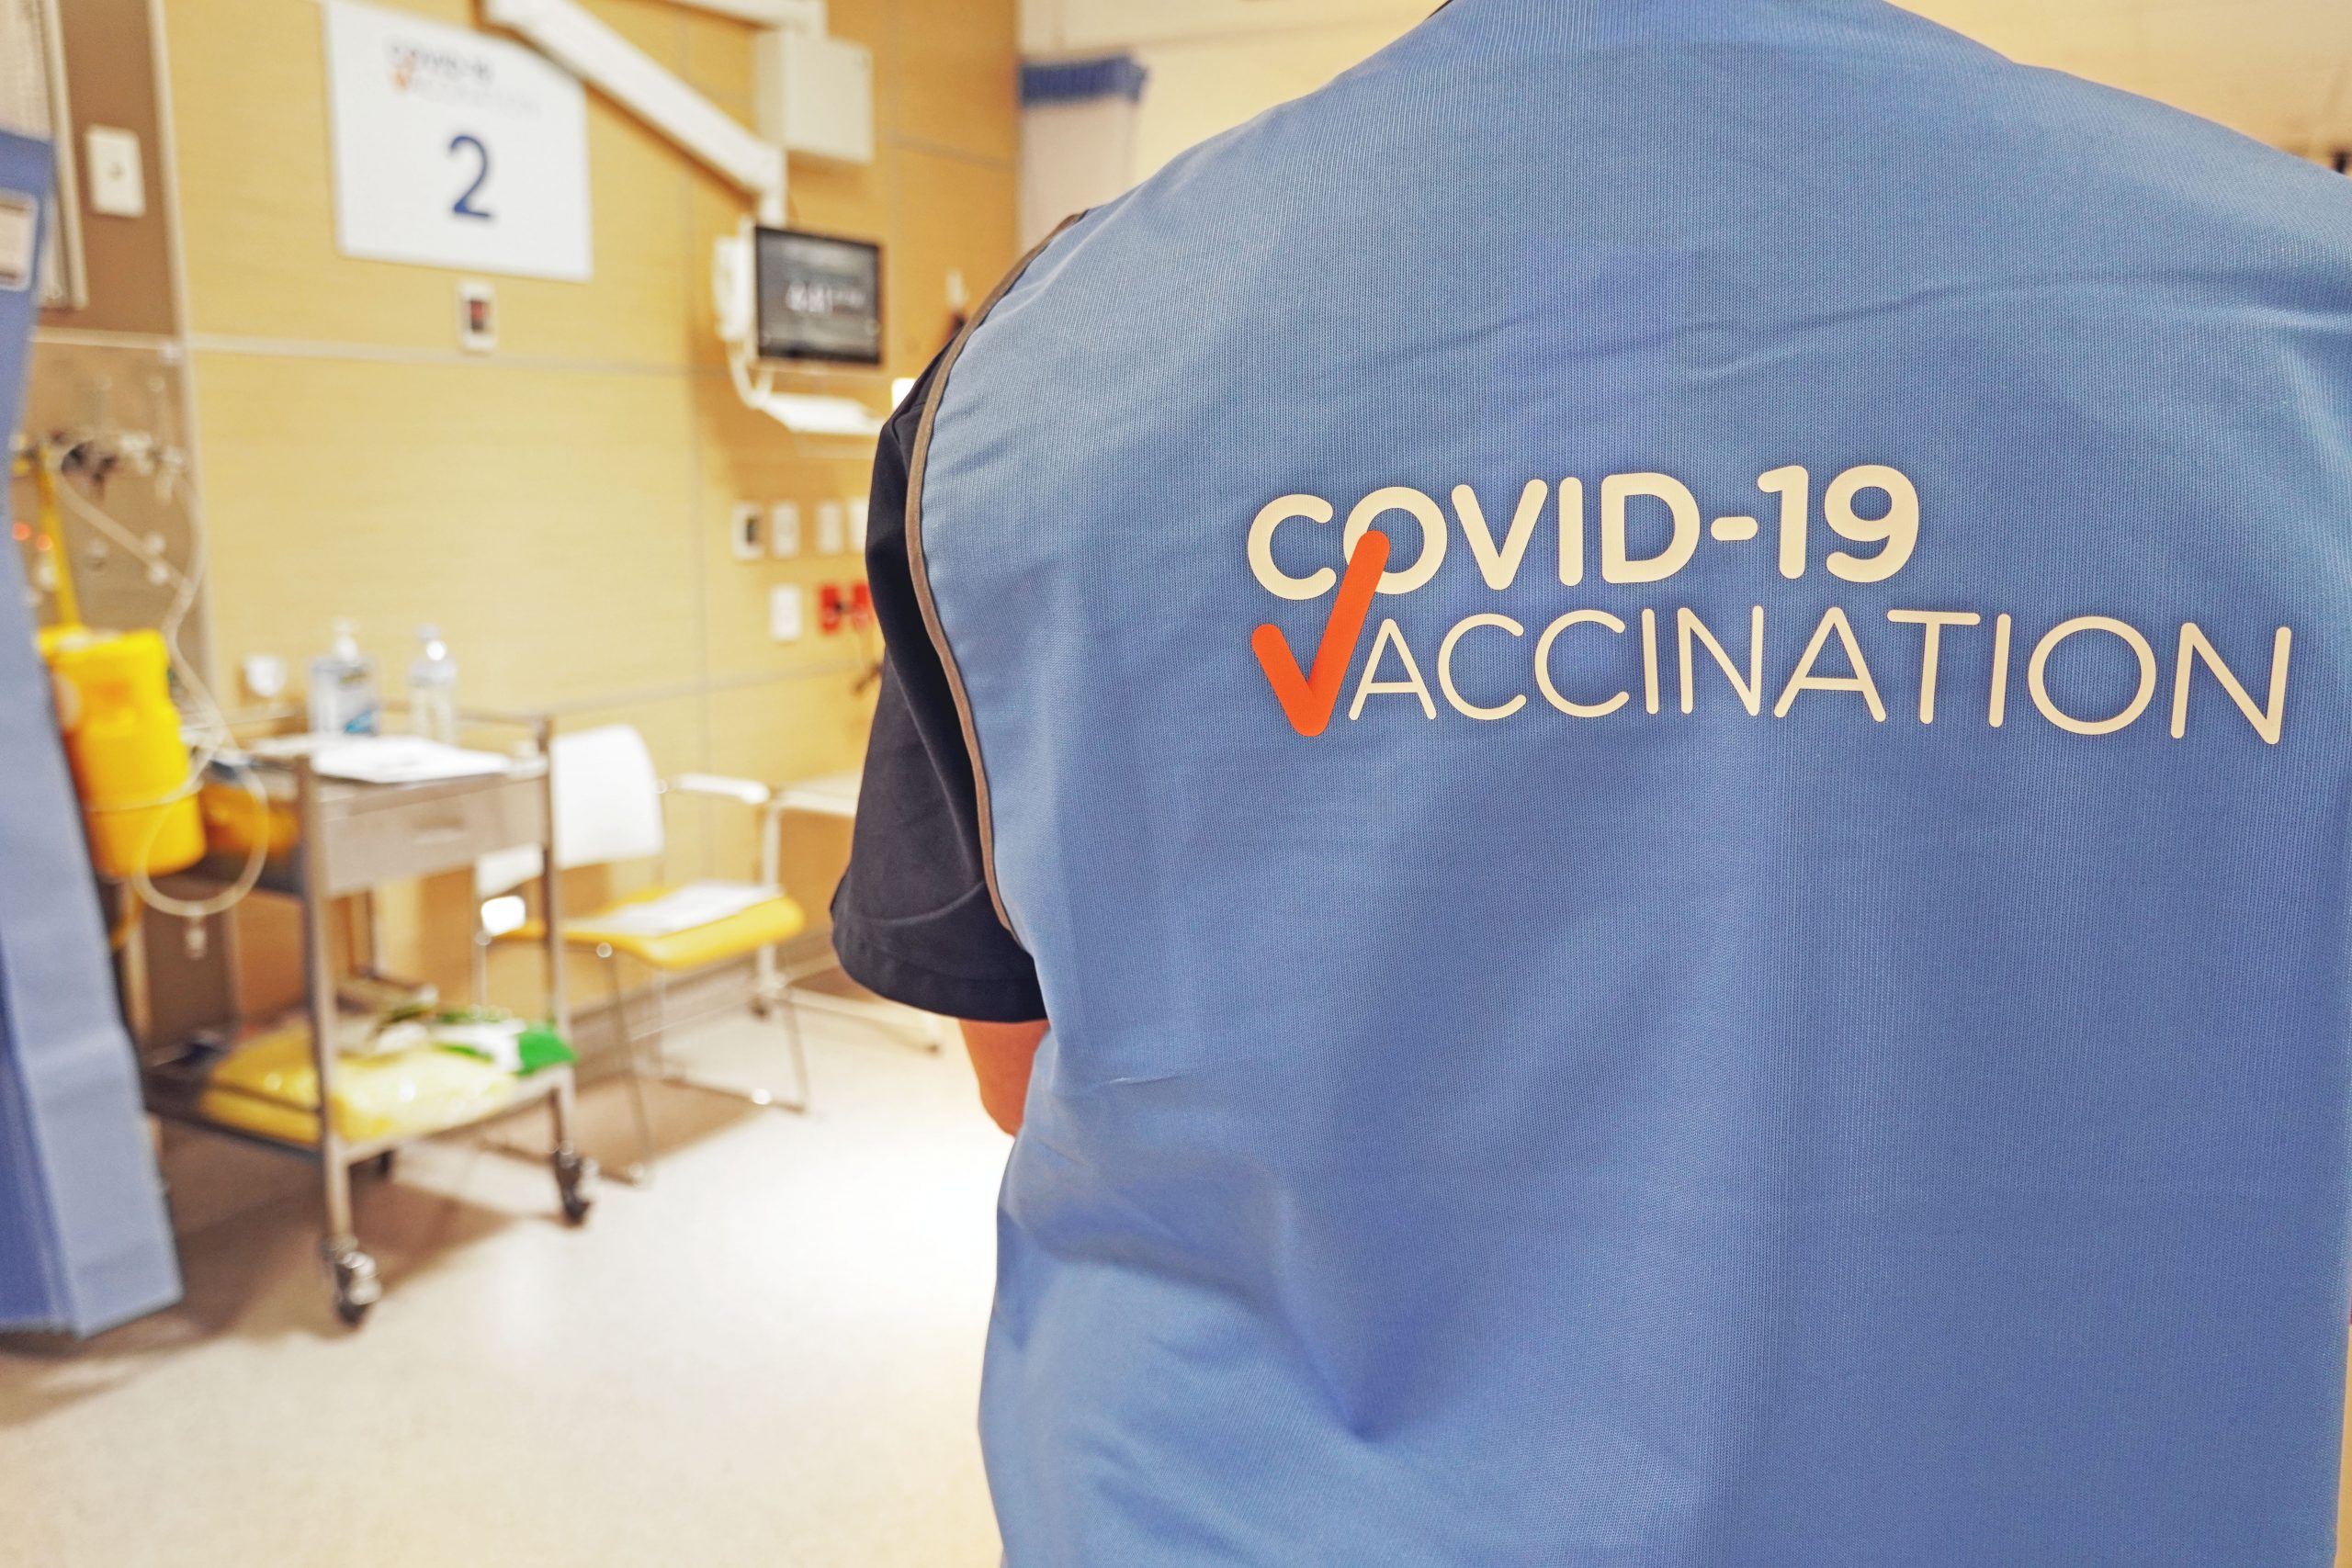 South Australia's busiest COVID-19 vaccination program achieves another milestone